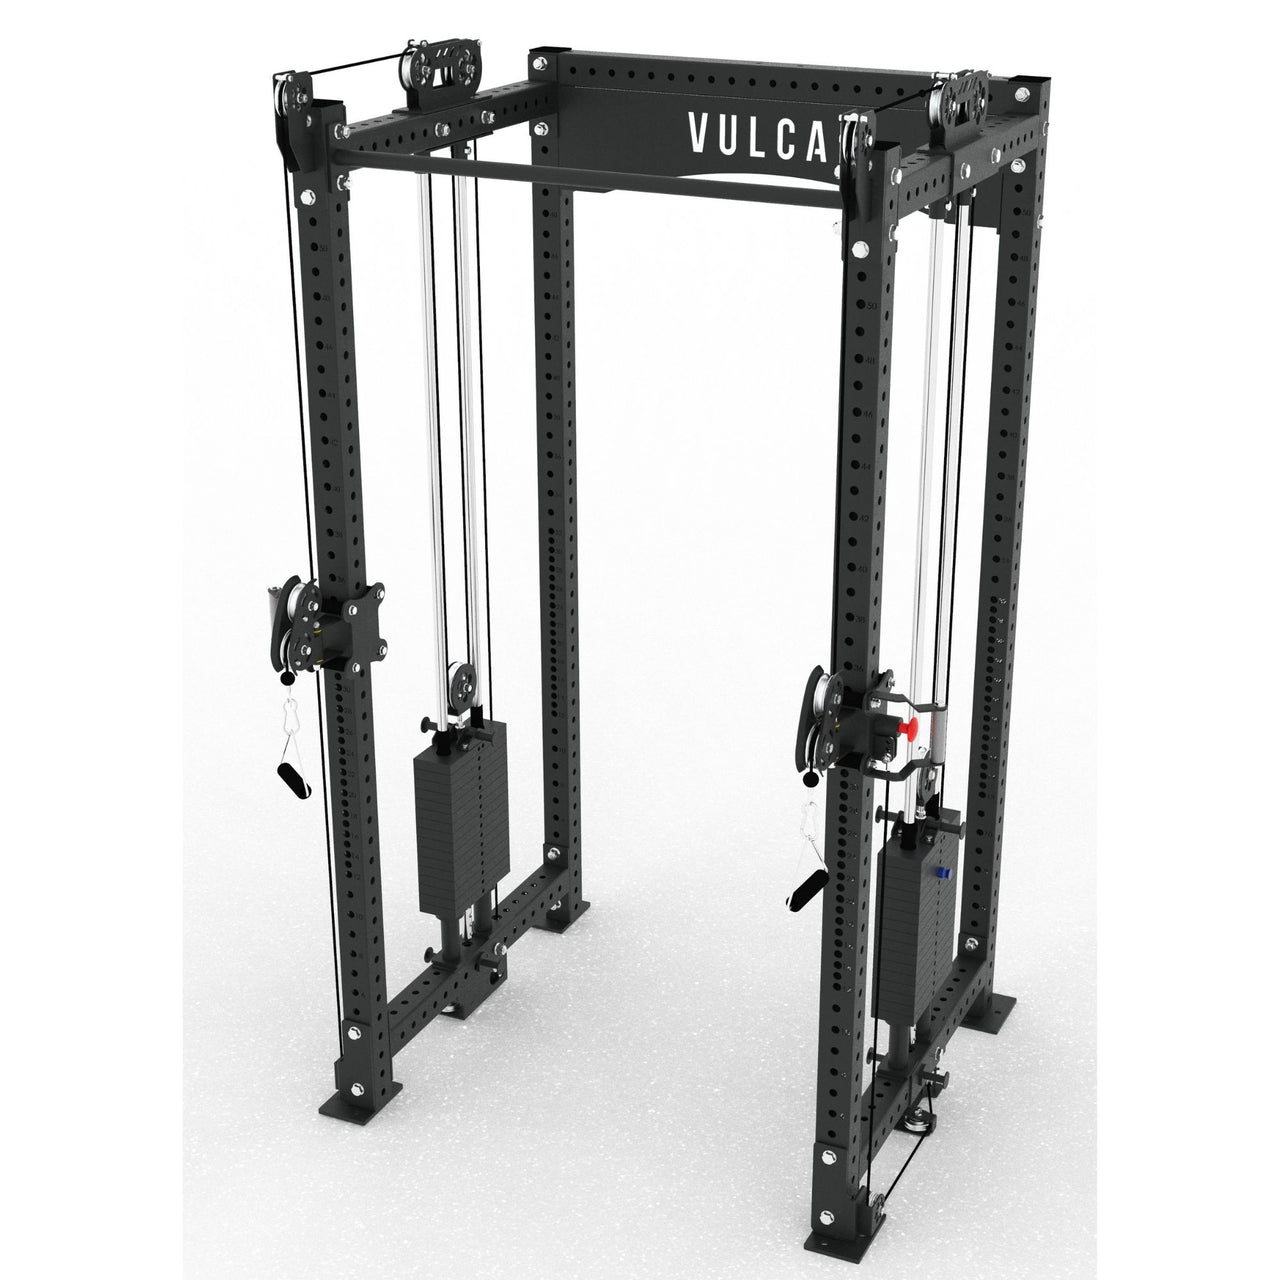 VULCAN Commercial Power Rack with Olympus Attachment | IN STOCK